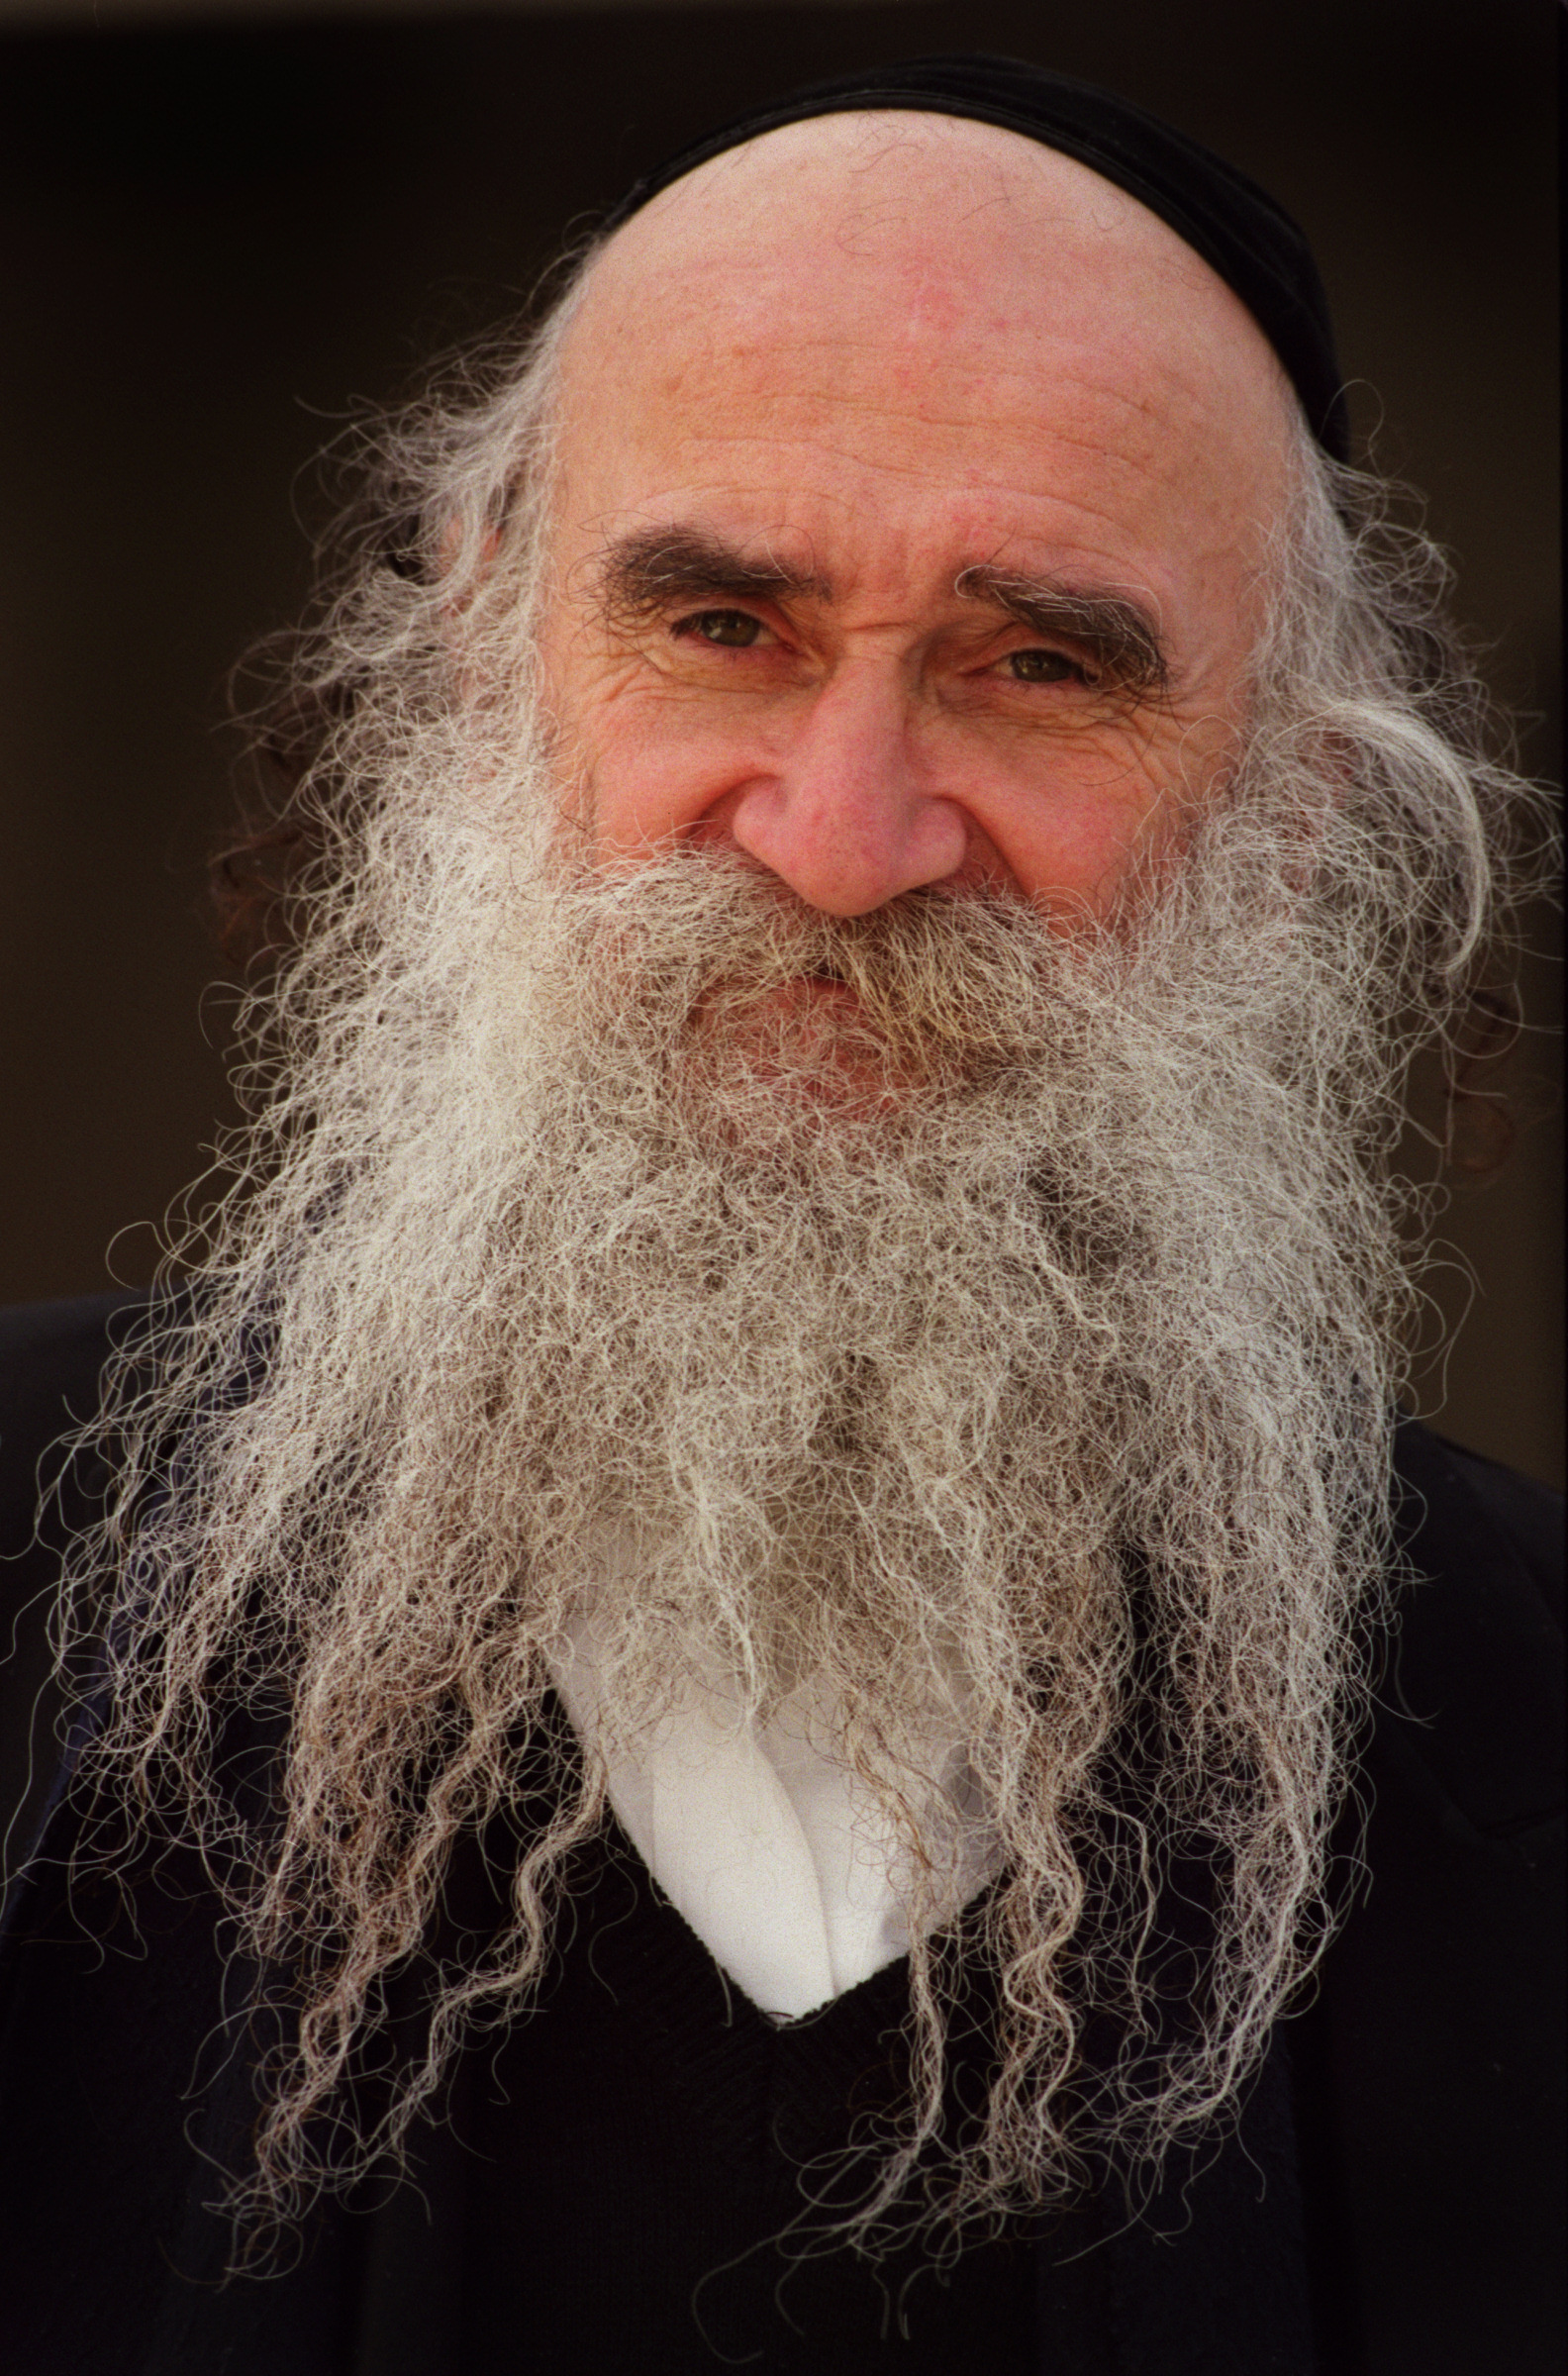  A holy man rom the town of Zefat, formerly one of the main centers of Jewish mysticism and Kabbalism in the Holy Land which has remained an important center for Talmudic study.&nbsp;©Gail Fisher Los Angeles Times 